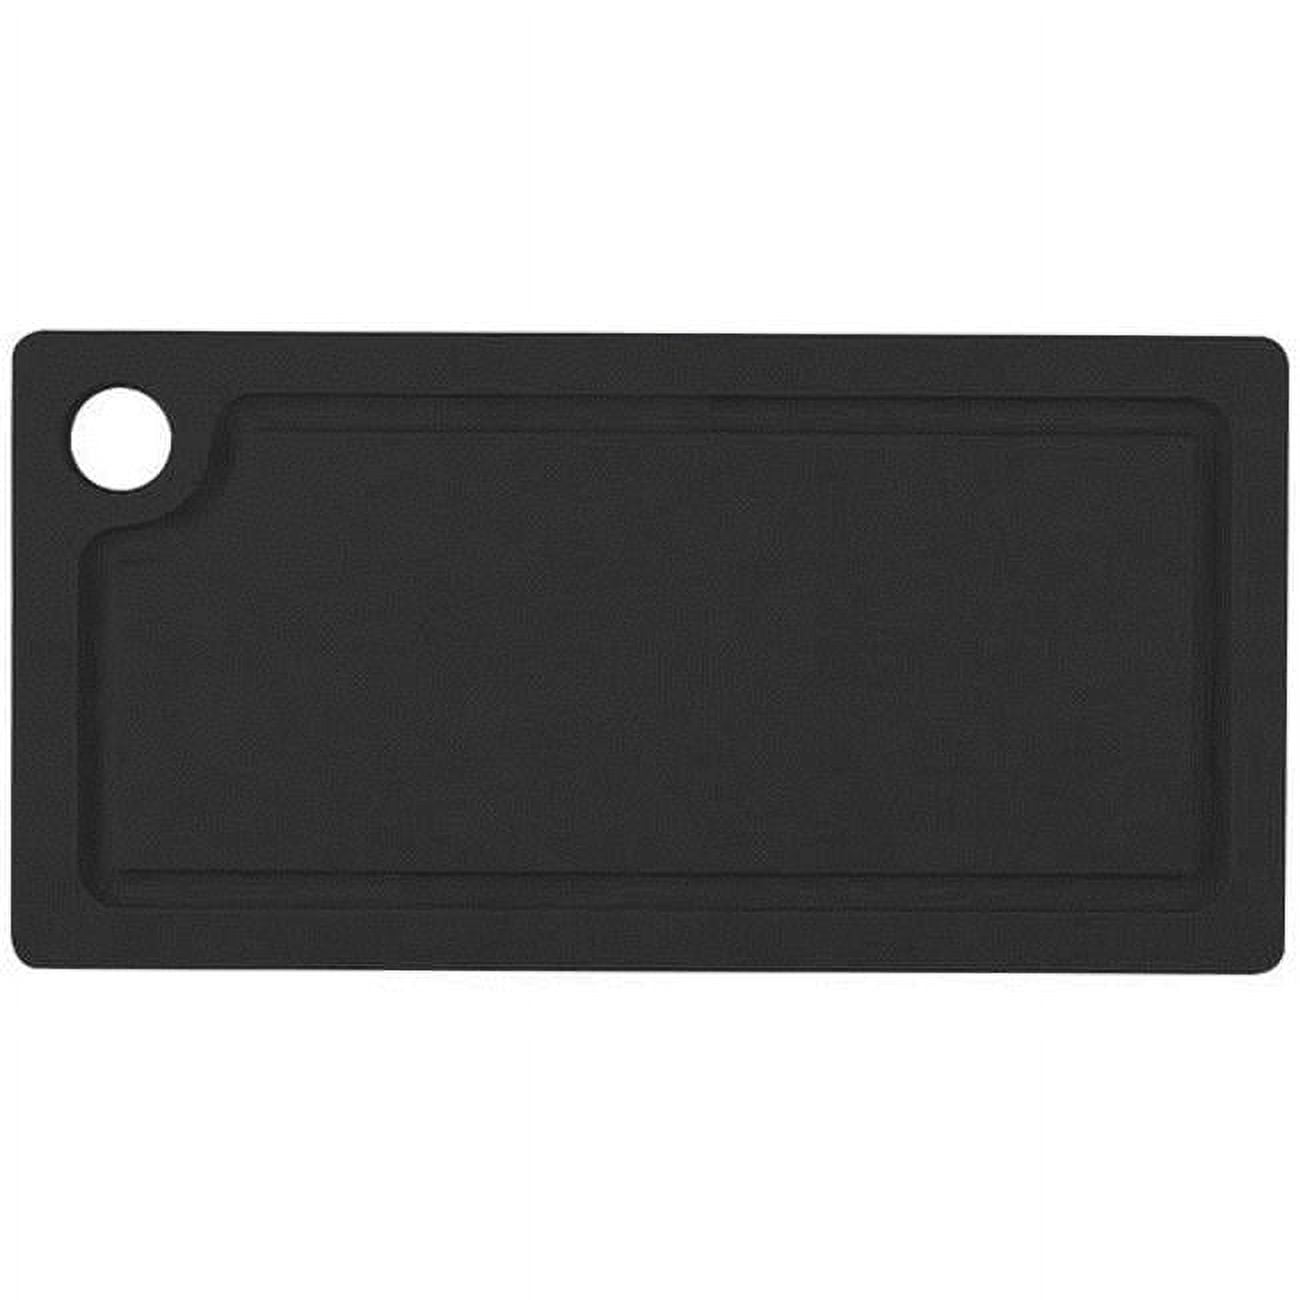 Picture of Cal Mil 3337-612-13 6 x 12 in. Black Cutting Board